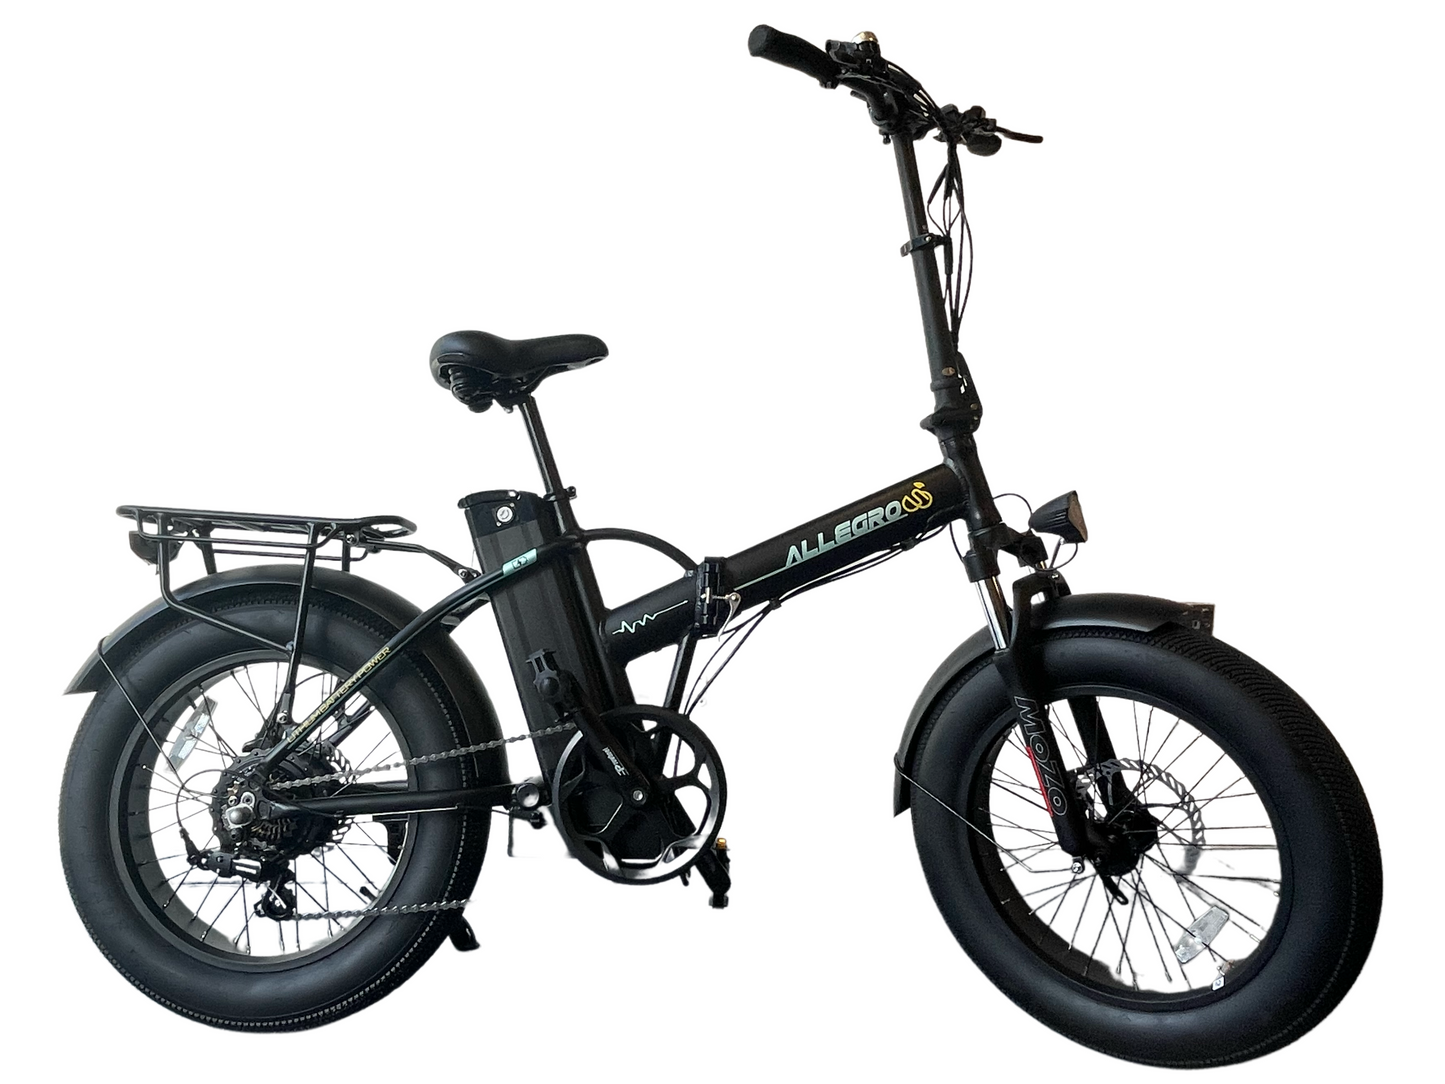 Full view of Allegro Electric Bike showcasing its design and electric features